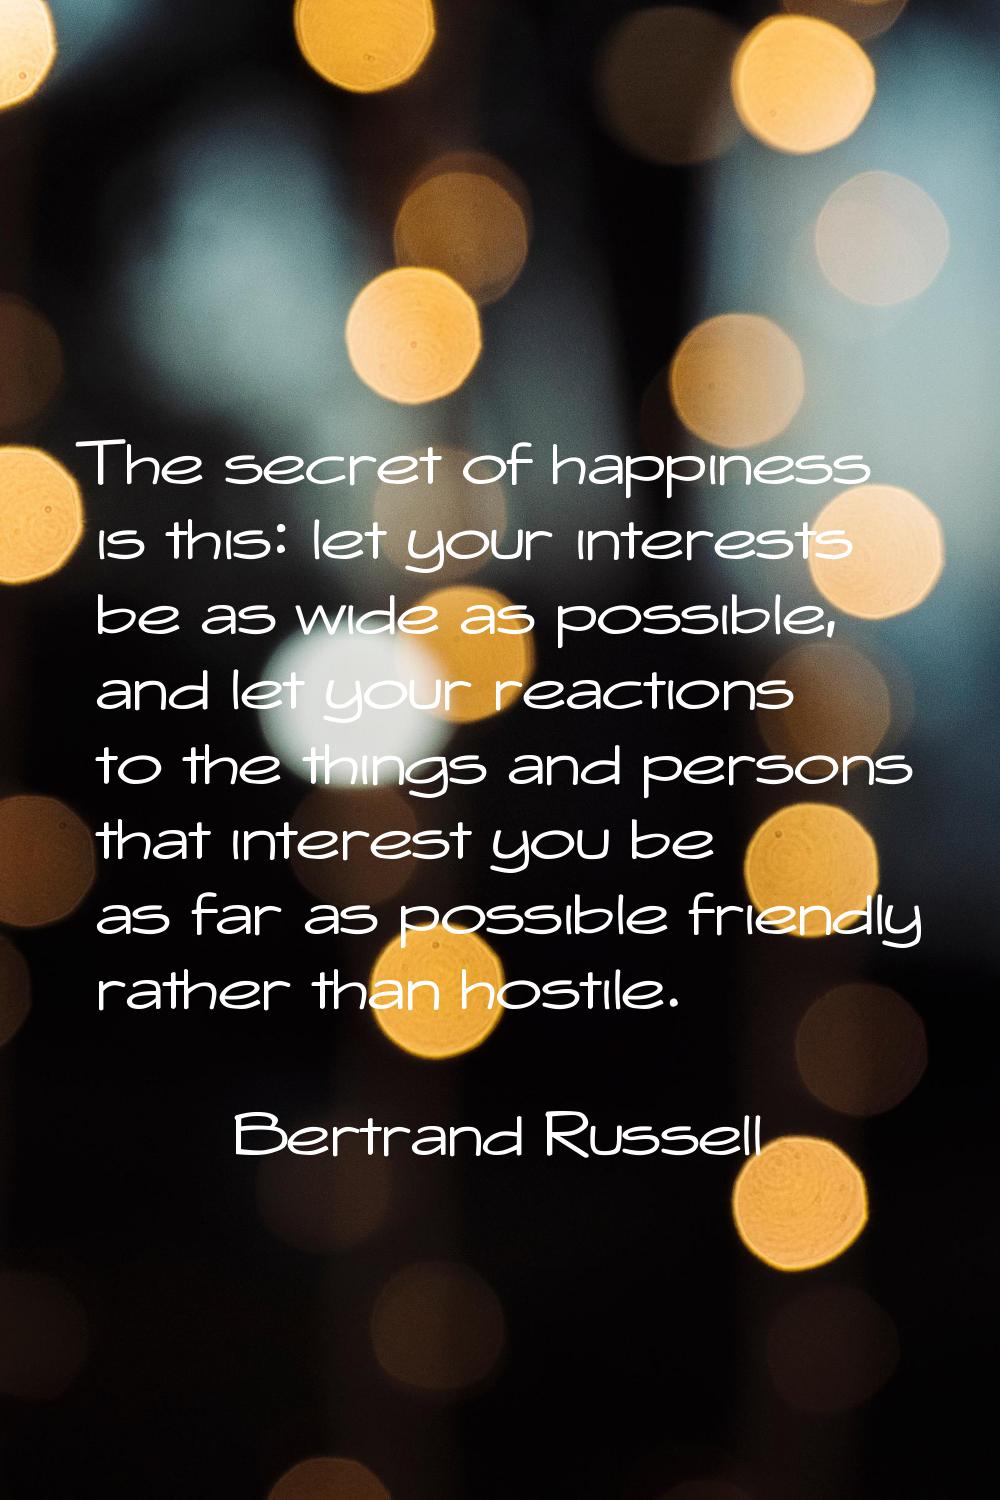 The secret of happiness is this: let your interests be as wide as possible, and let your reactions 